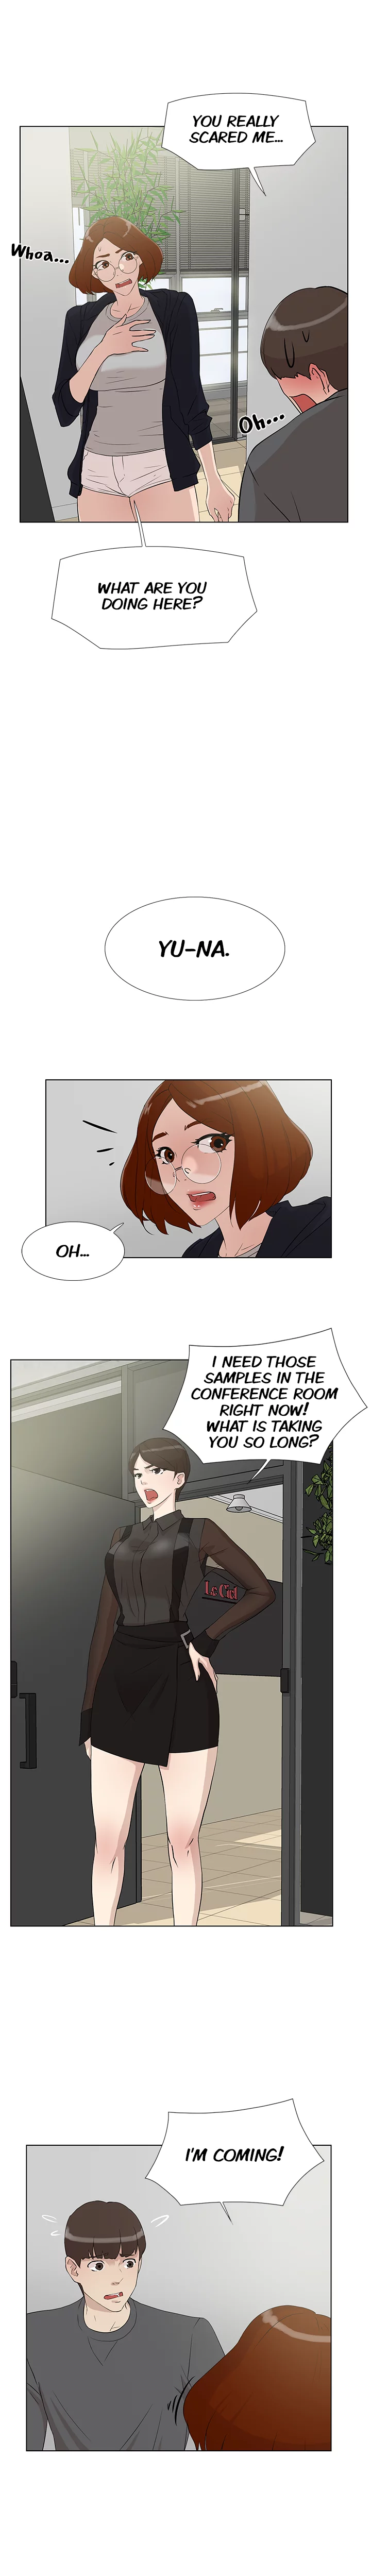 Office Affairs - Chapter 9 Page 5